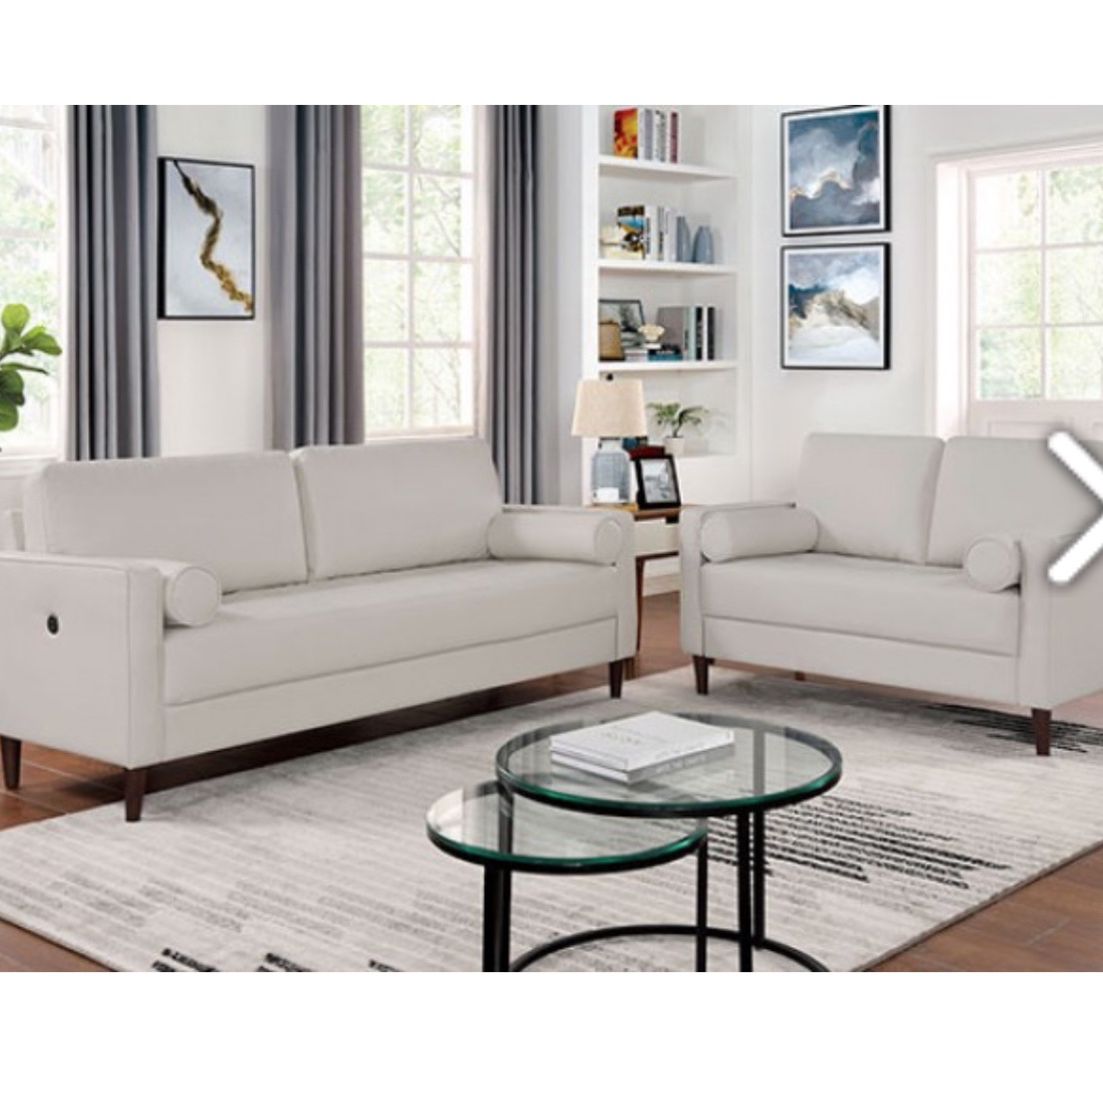 SOFA & LOVESEAT (FREE DELIVERY)